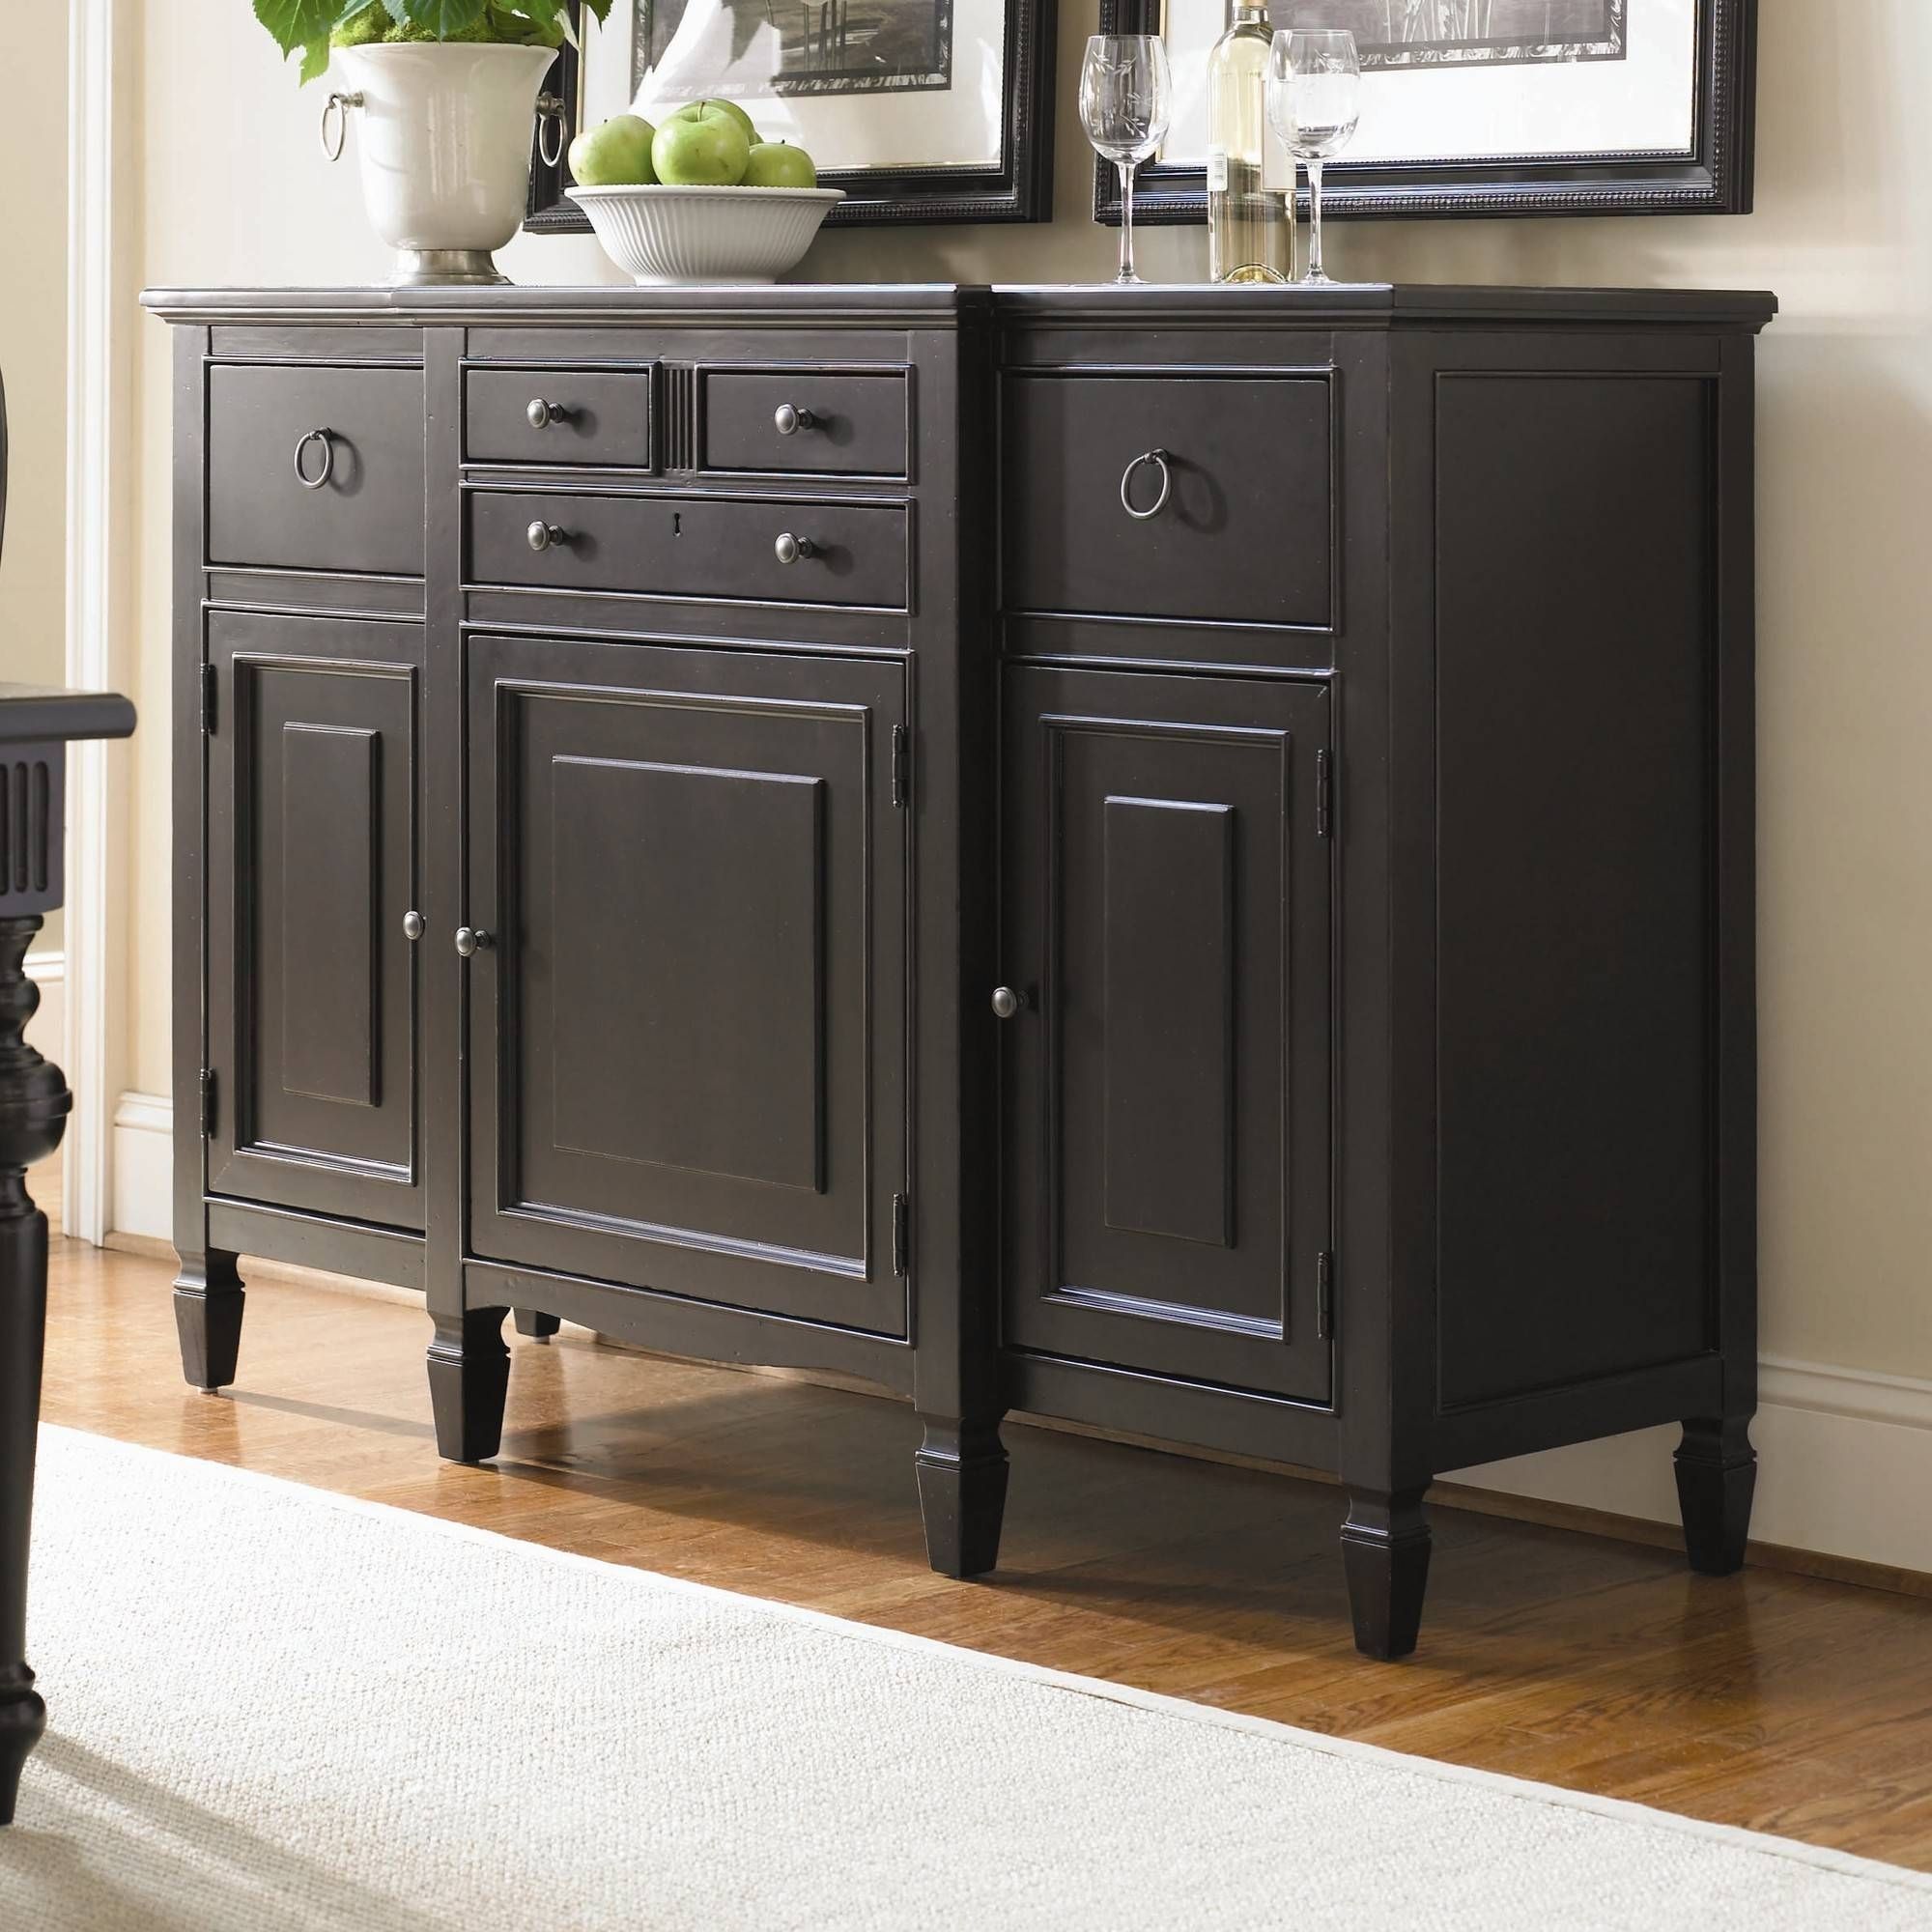 Sideboards. Amusing Buffet Table With Drawers: Buffet Table With With Regard To Small Black Sideboards (Photo 15 of 30)